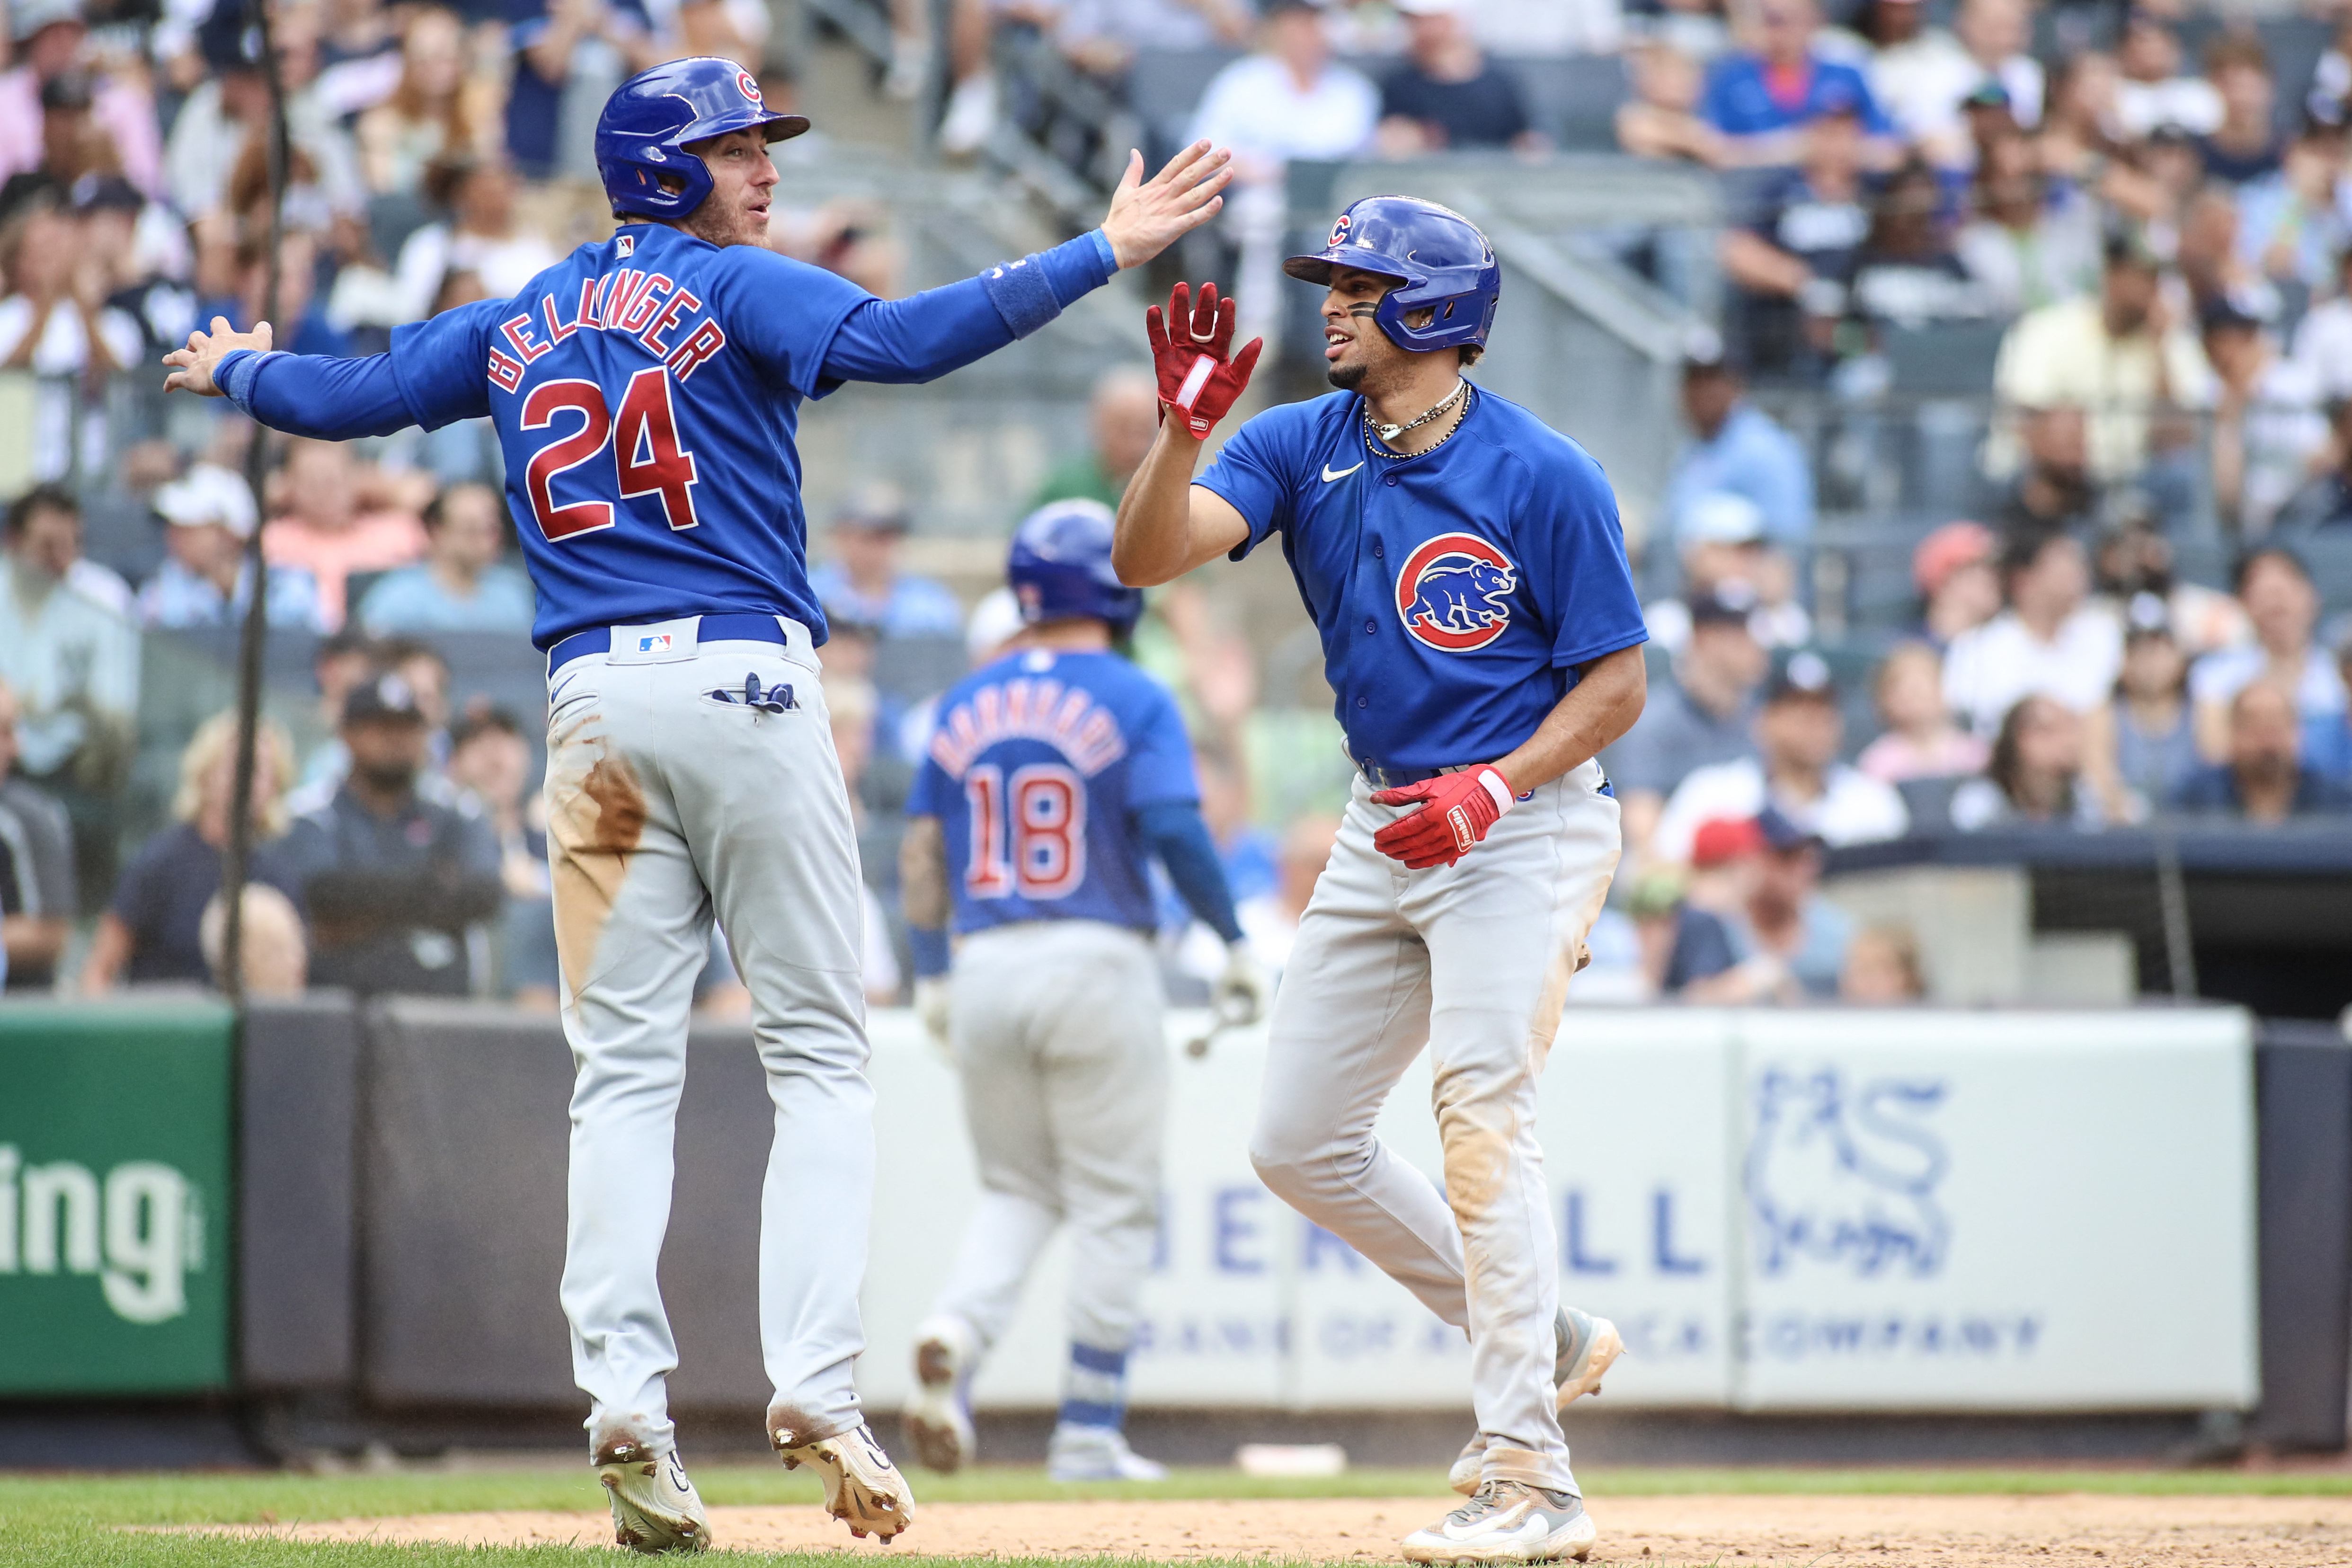 MLB Chicago Cubs at the New York Yankees - All Photos 